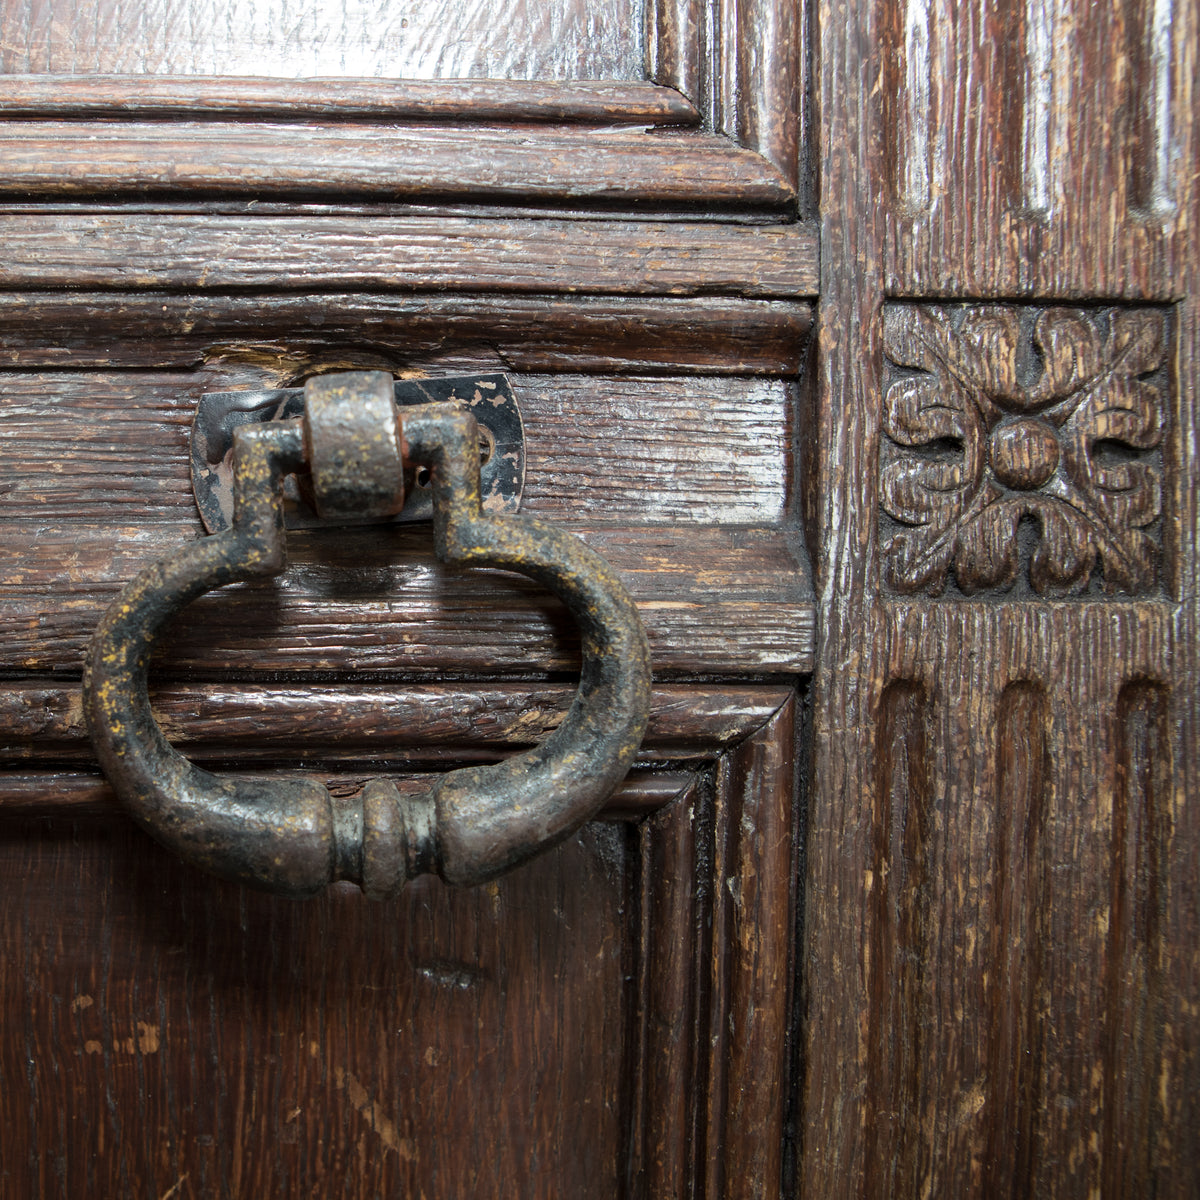 Carved Wooden Tudor Style Double Doors from King Edward VII Hospital | The Architectural Forum